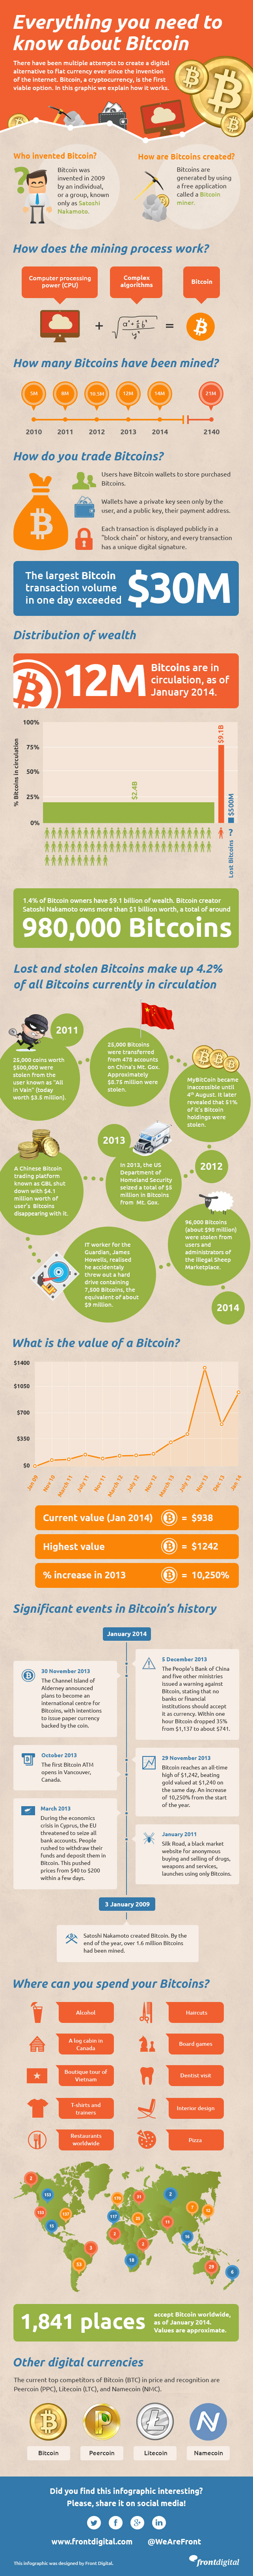 Everything You Need to Know About Bitcoins